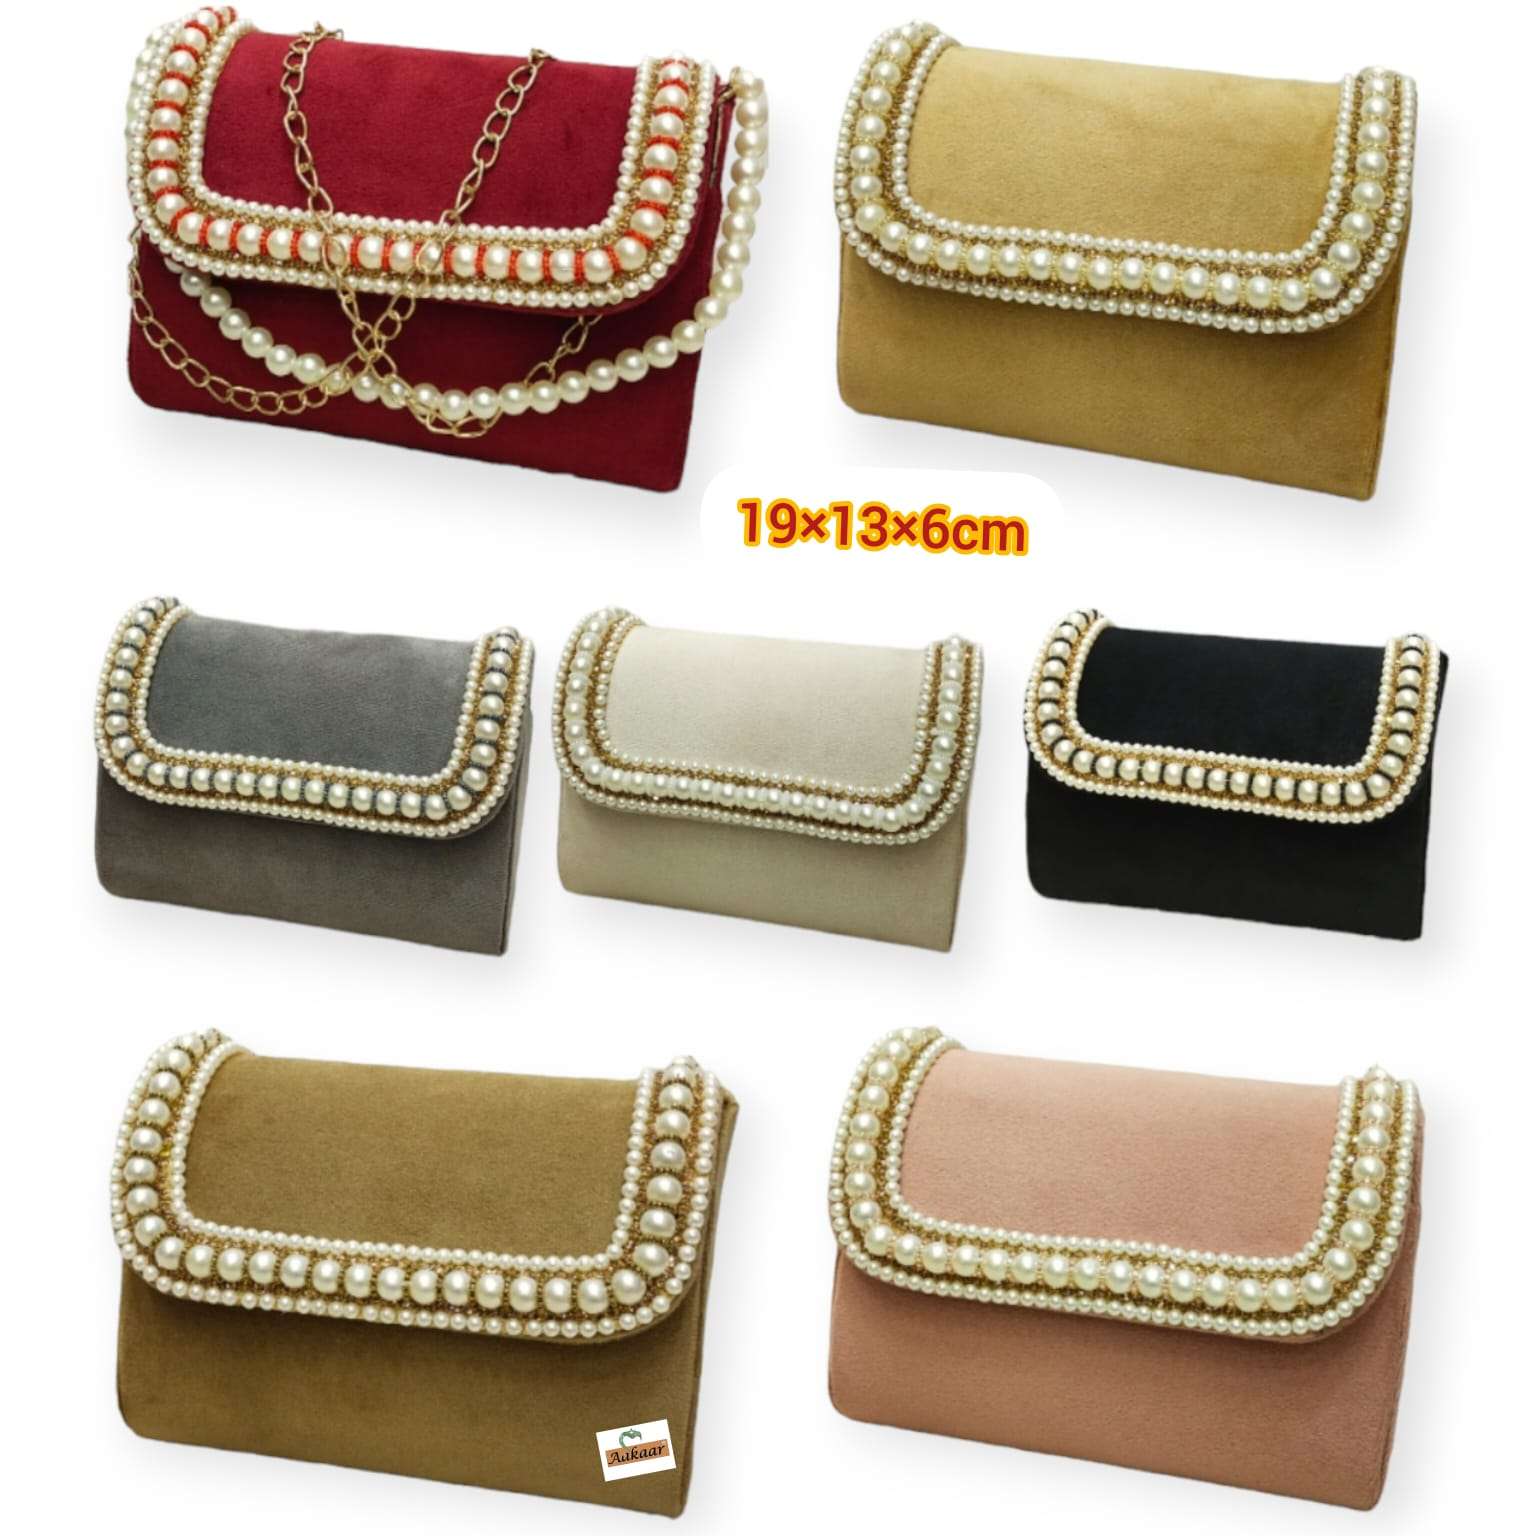 Luxury Designer Cosmetic Travel Case For Women Wholesale Handbag Purse With  Mini Pouch And New Clutch 47513 From Chengguodong1234, $33.01 | DHgate.Com